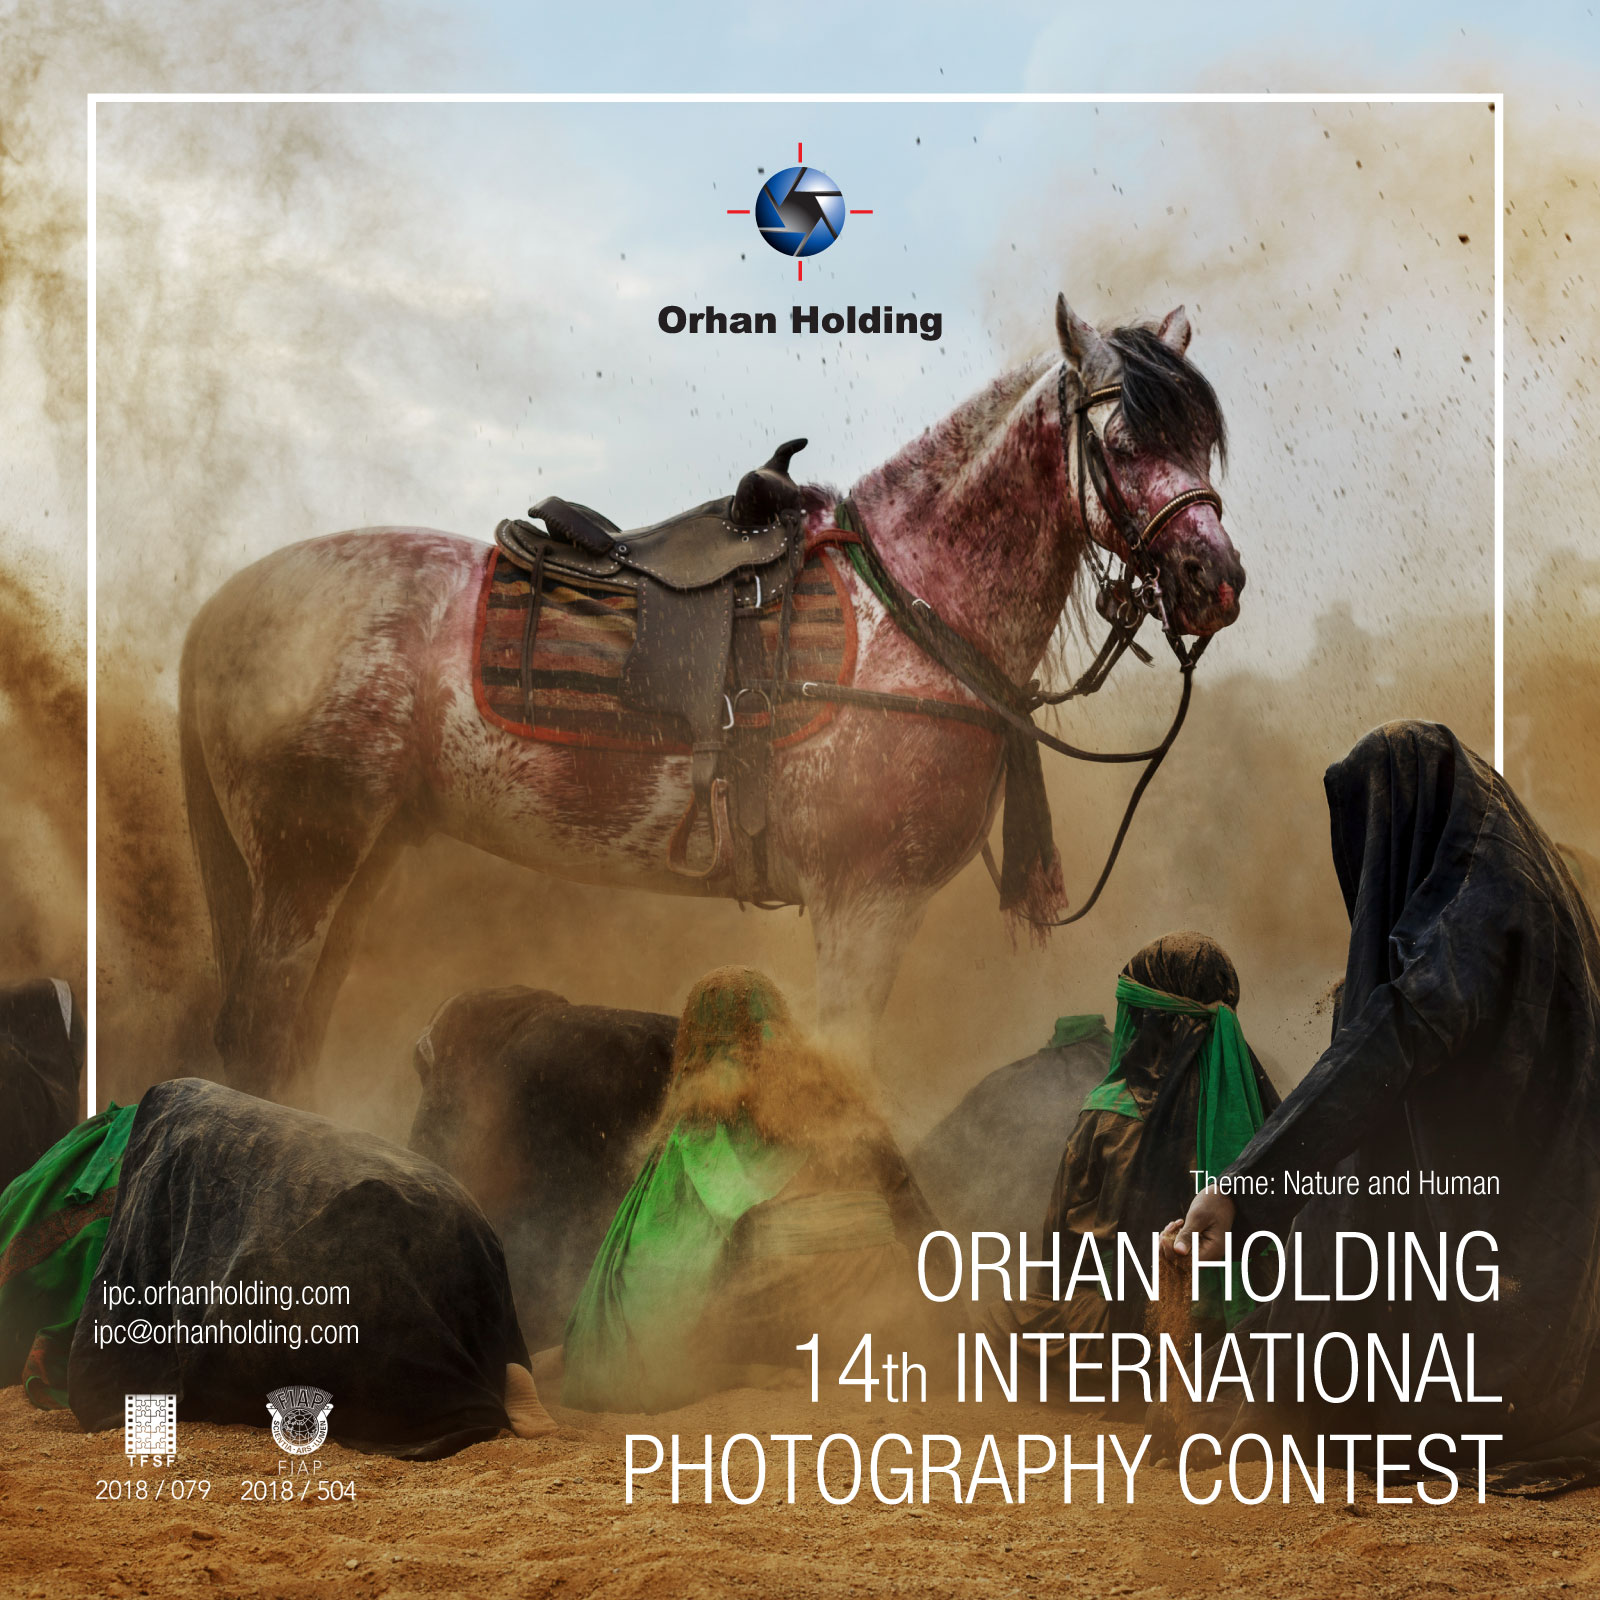 ORHAN HOLDING 14th INTERNATIONAL PHOTOGRAPHY CONTEST